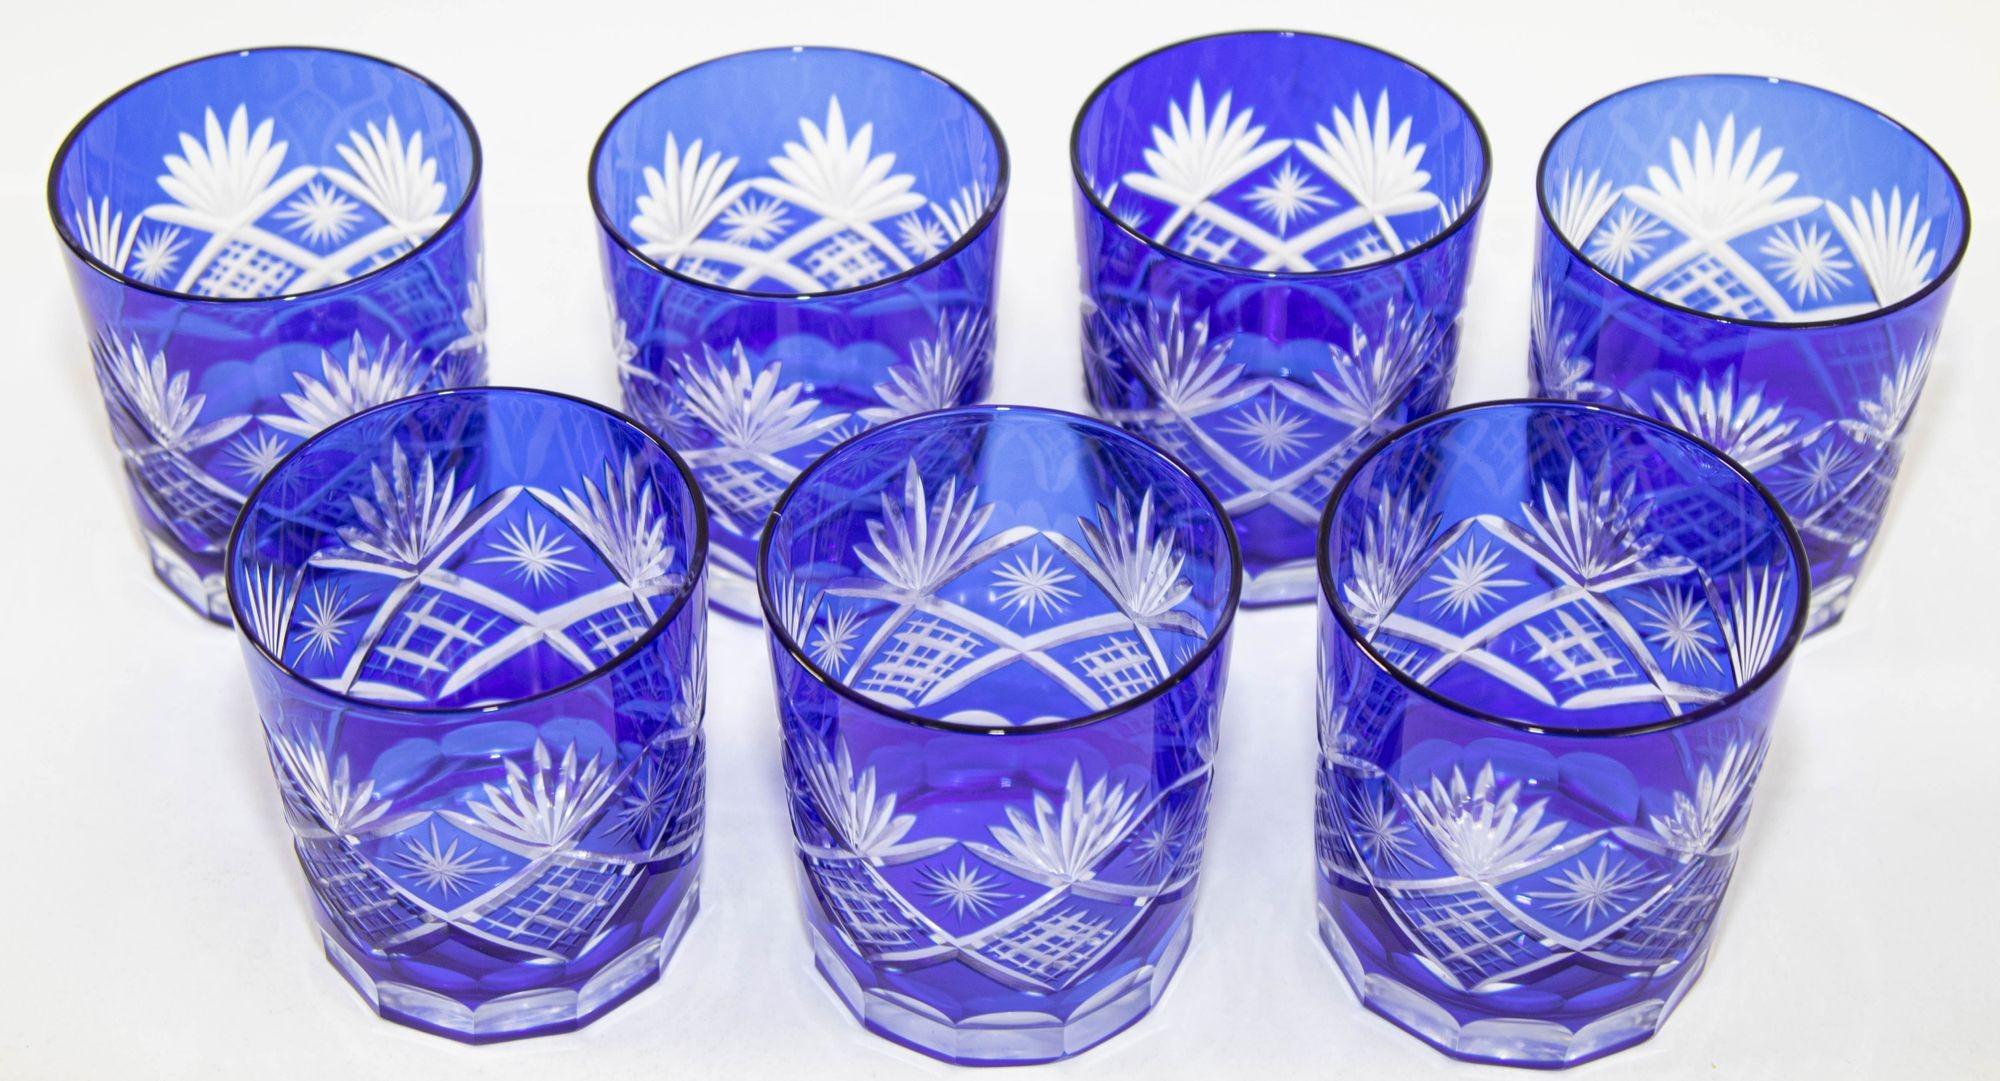 Whiskey glass tumbler Baccarat sapphire blue cut crystal set of 7.
Set of seven vintage whiskey glasses tumbler cobalt blue crystal Baccarat style.
Exquisite Bohemian crystal style cut Czech drinking rock glasses.
The vibrant hand blown rich jewel